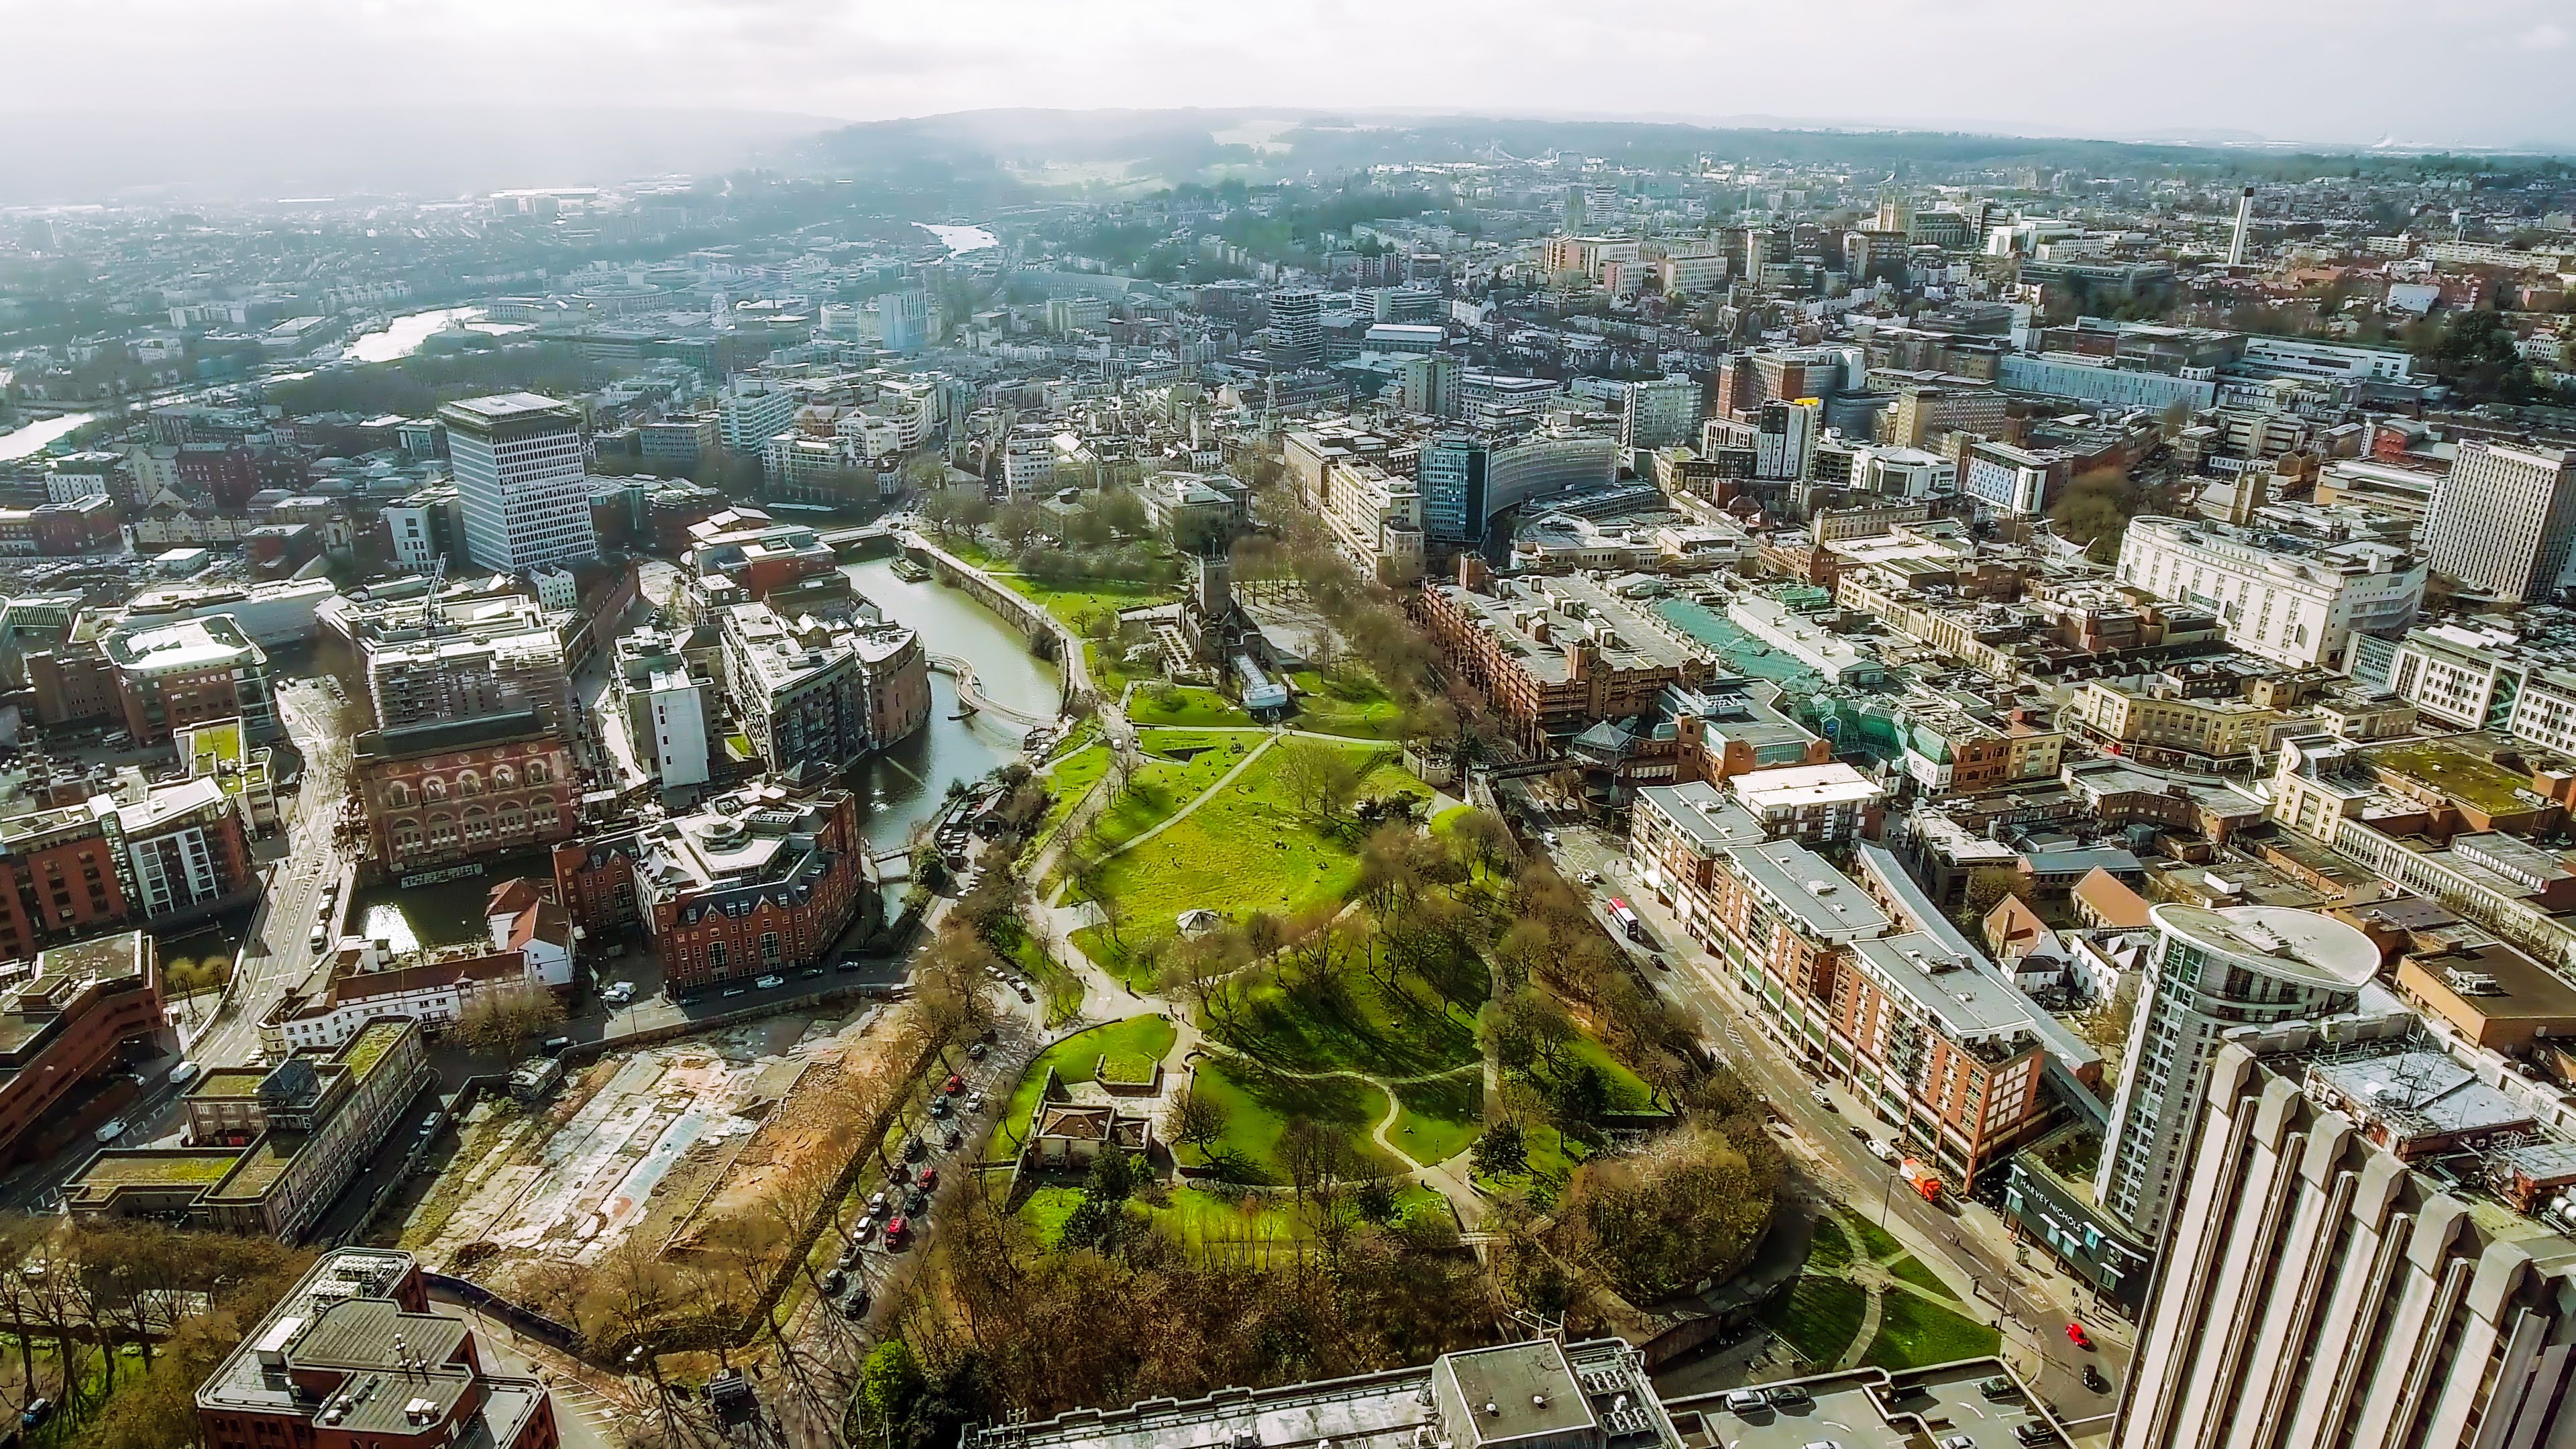 Bristol Net Zero by 2030 - Centre for Sustainable Energy